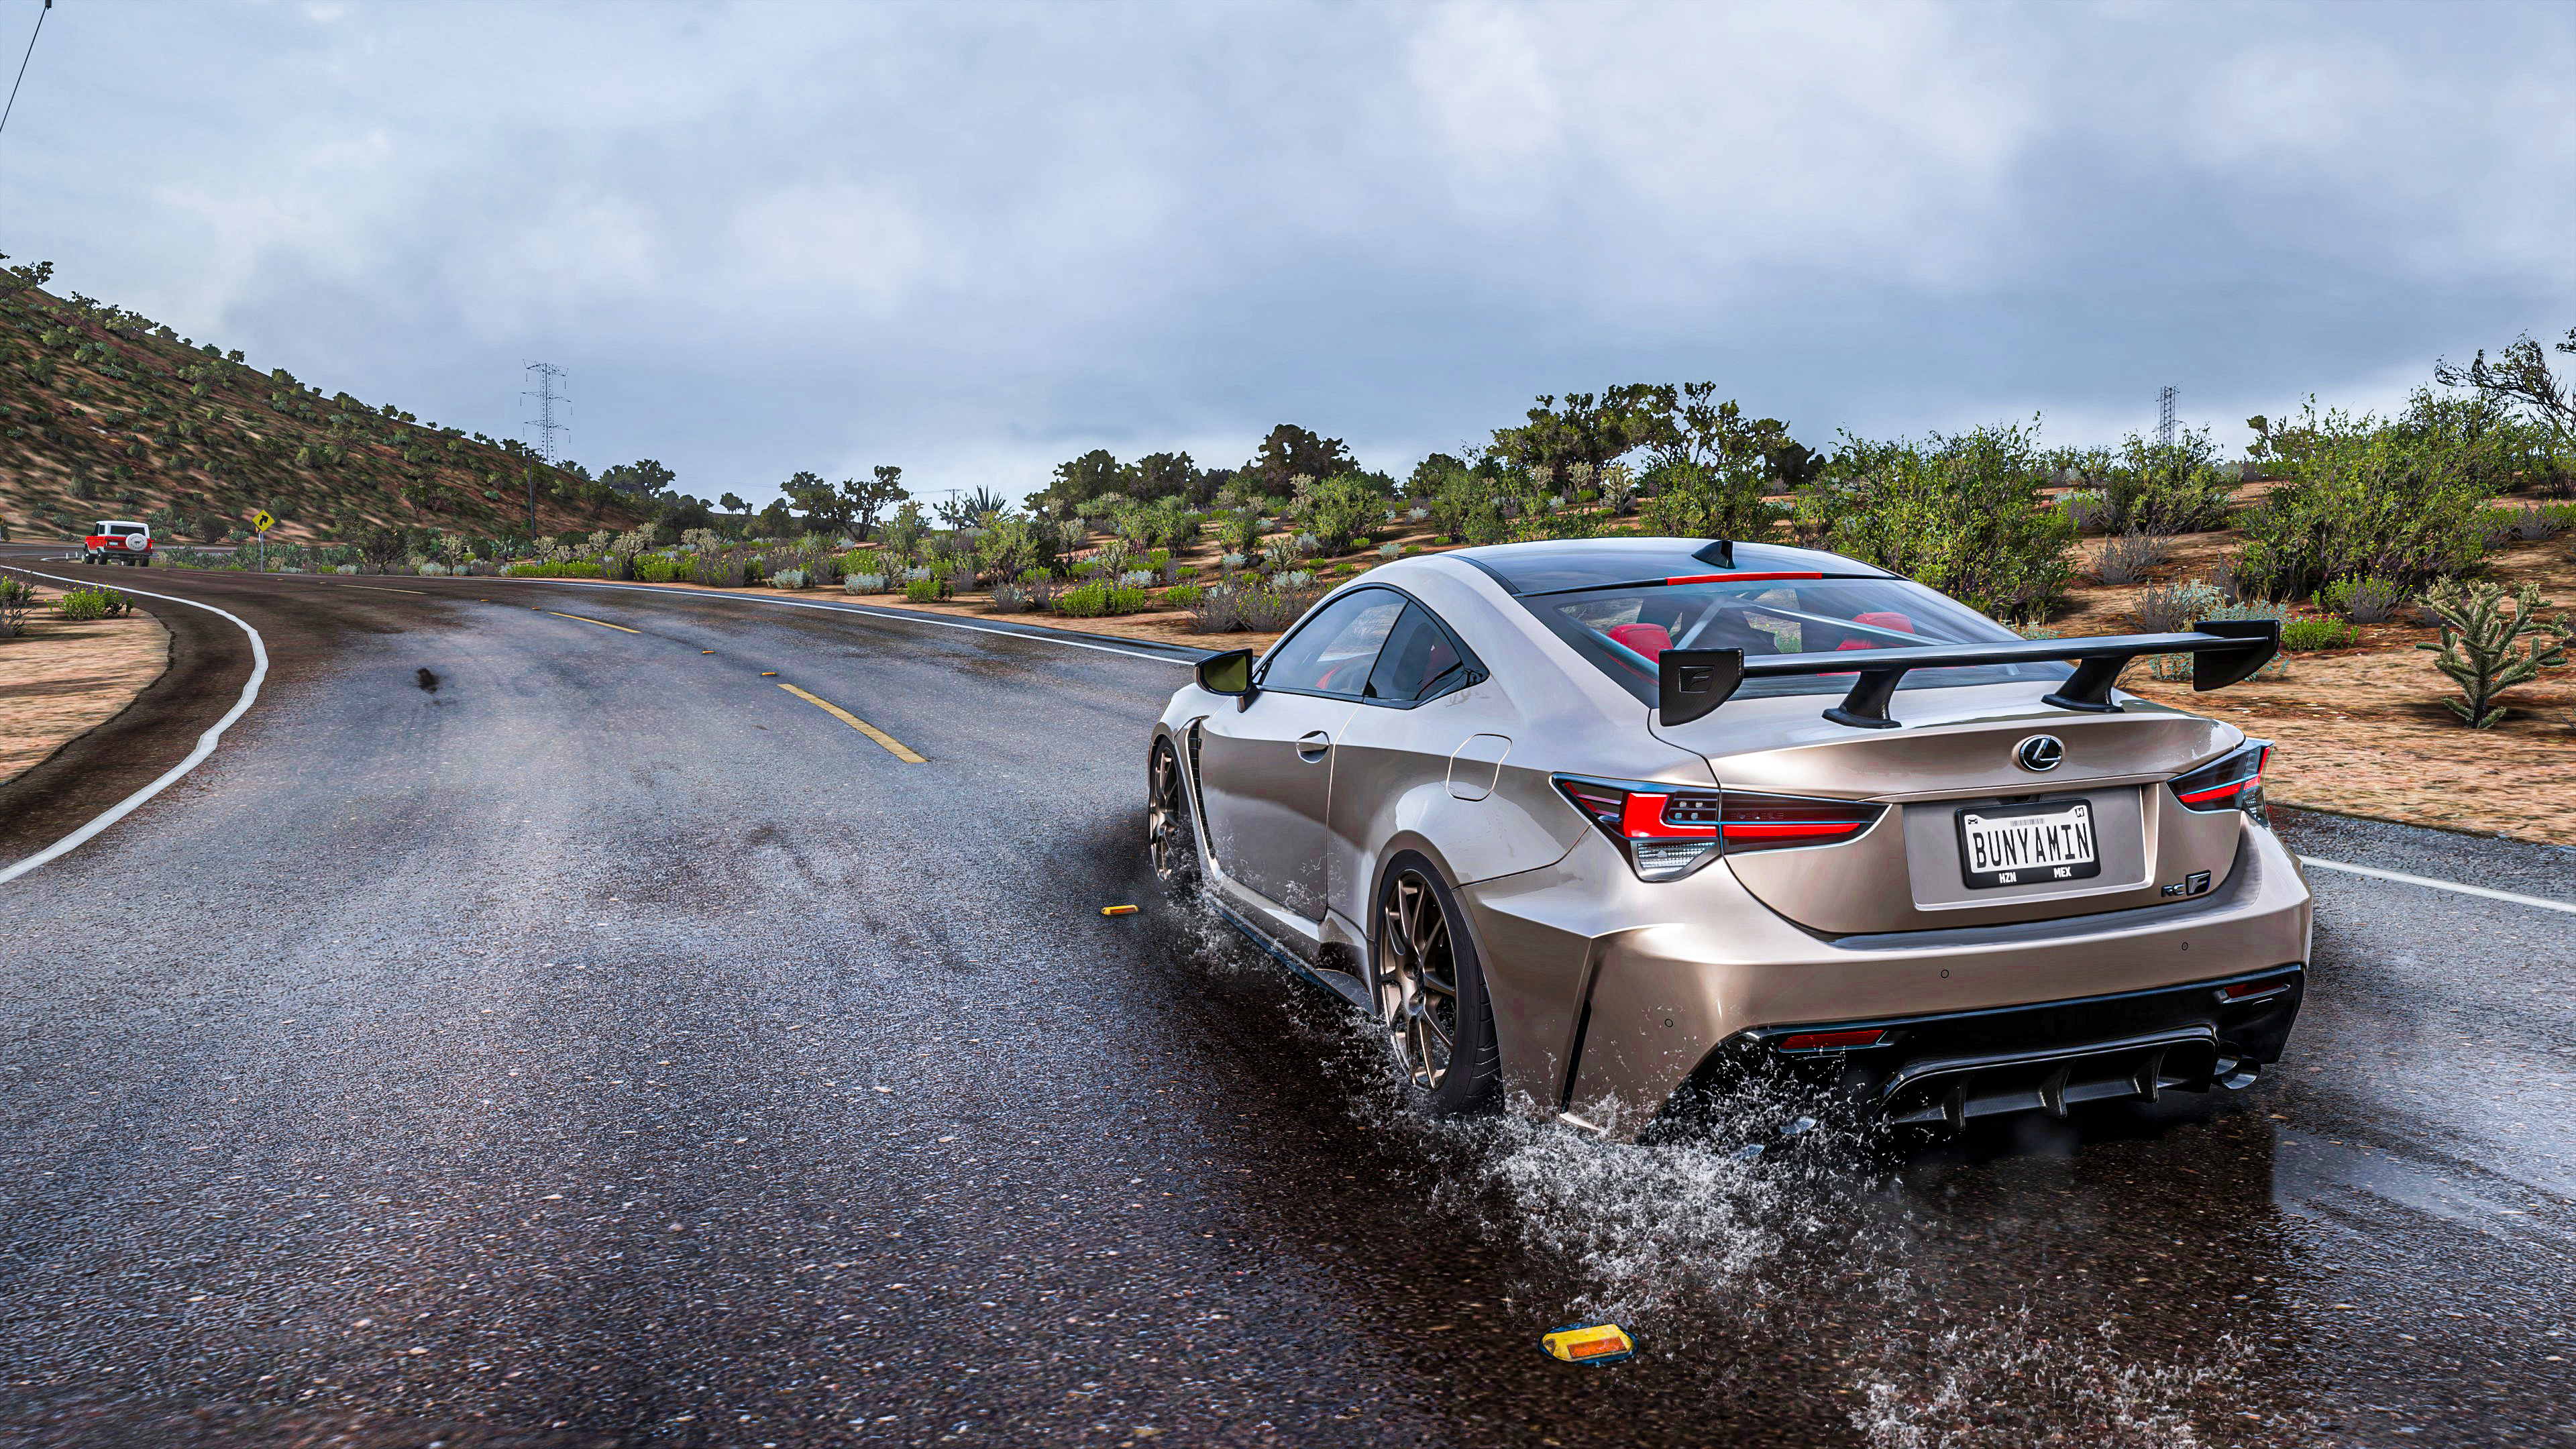 Lexus from the game Forza Horizon 5 in the rain